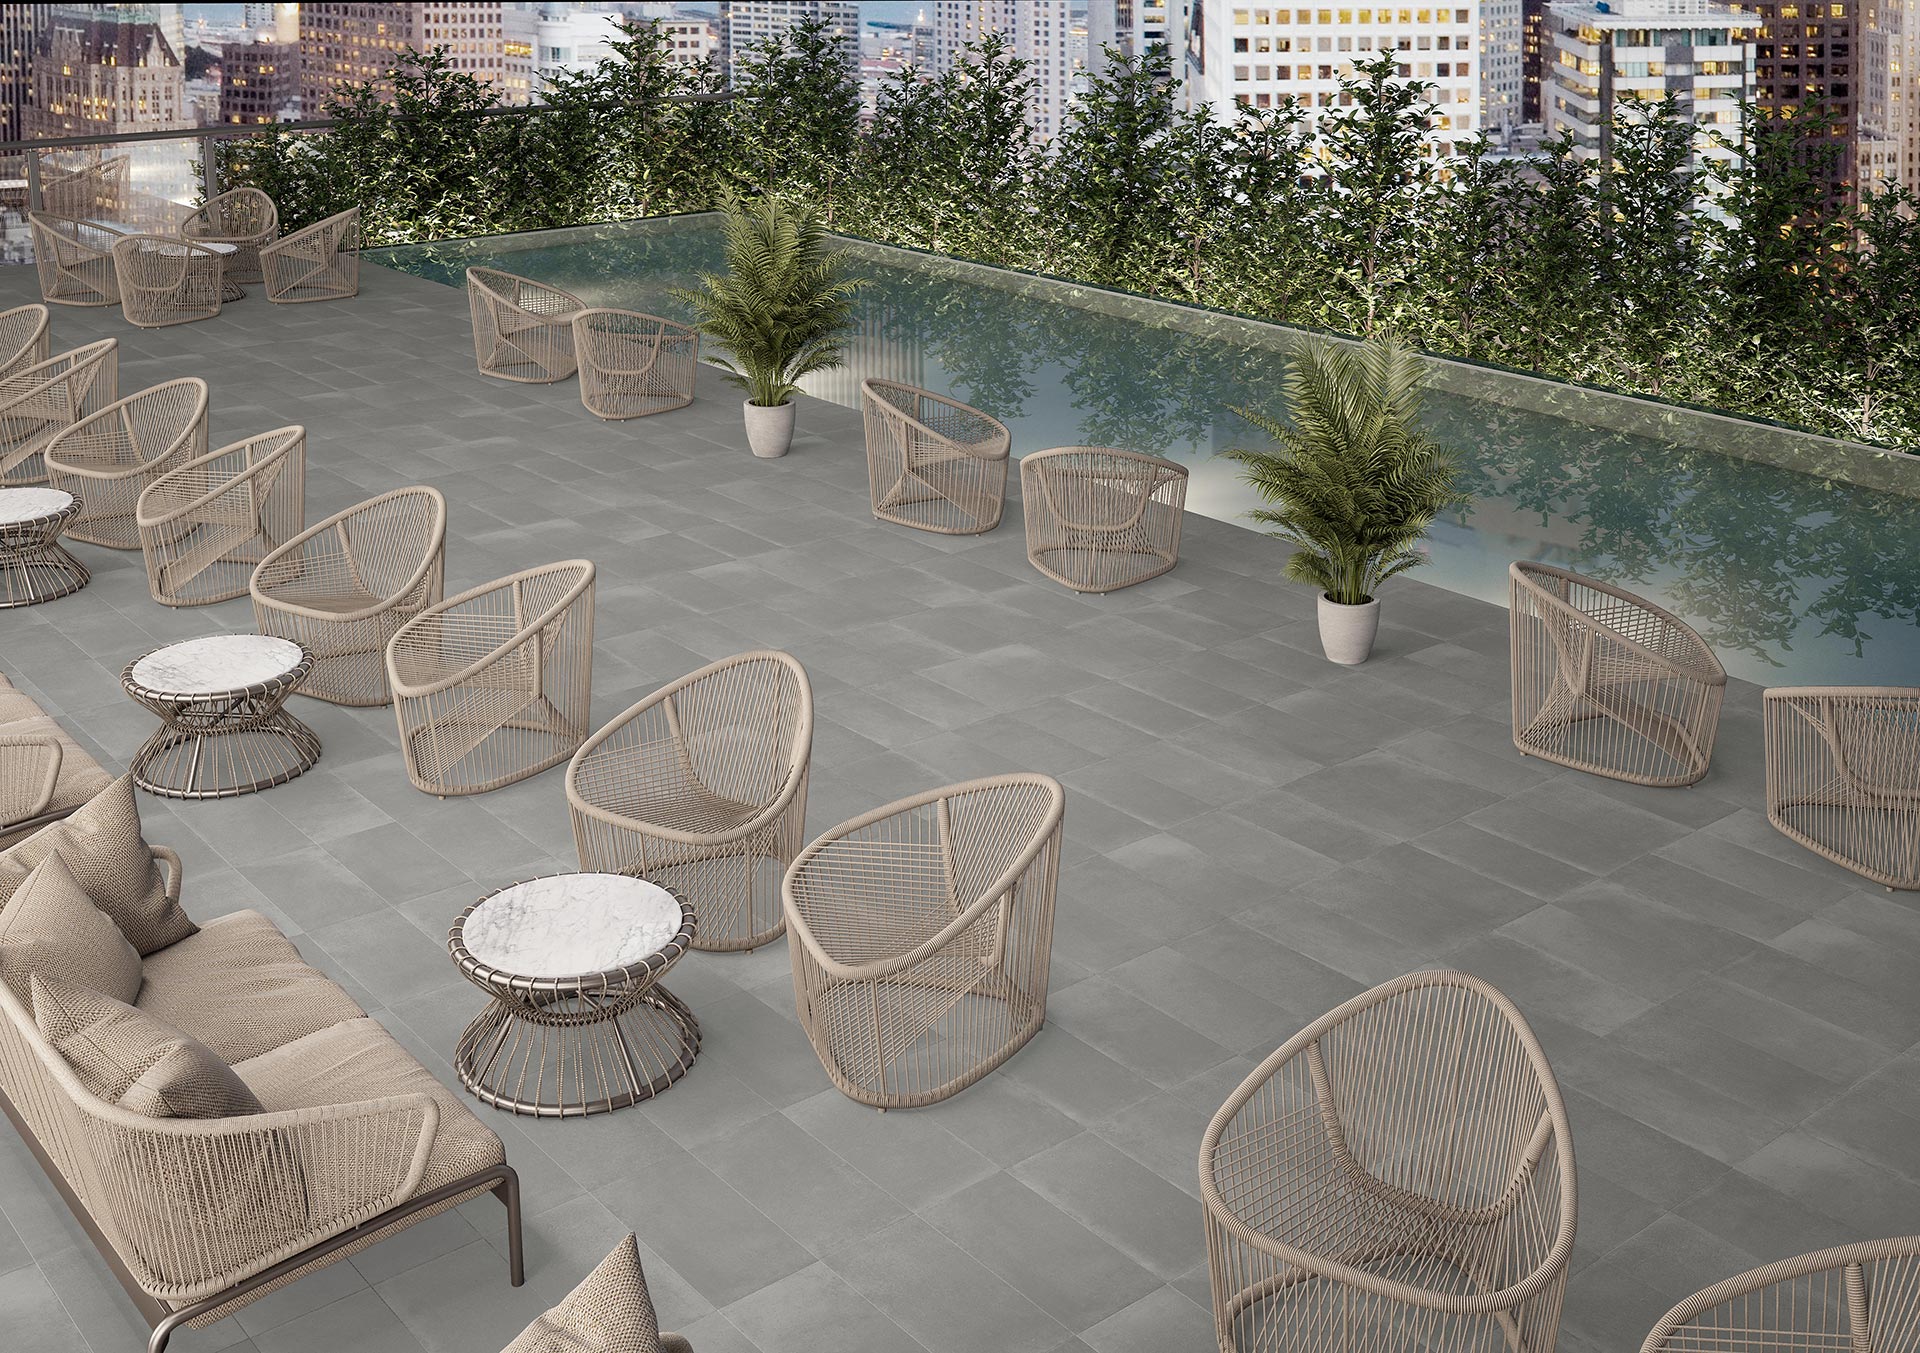 Oristan Collection by Tau Ceramica at Uptiles